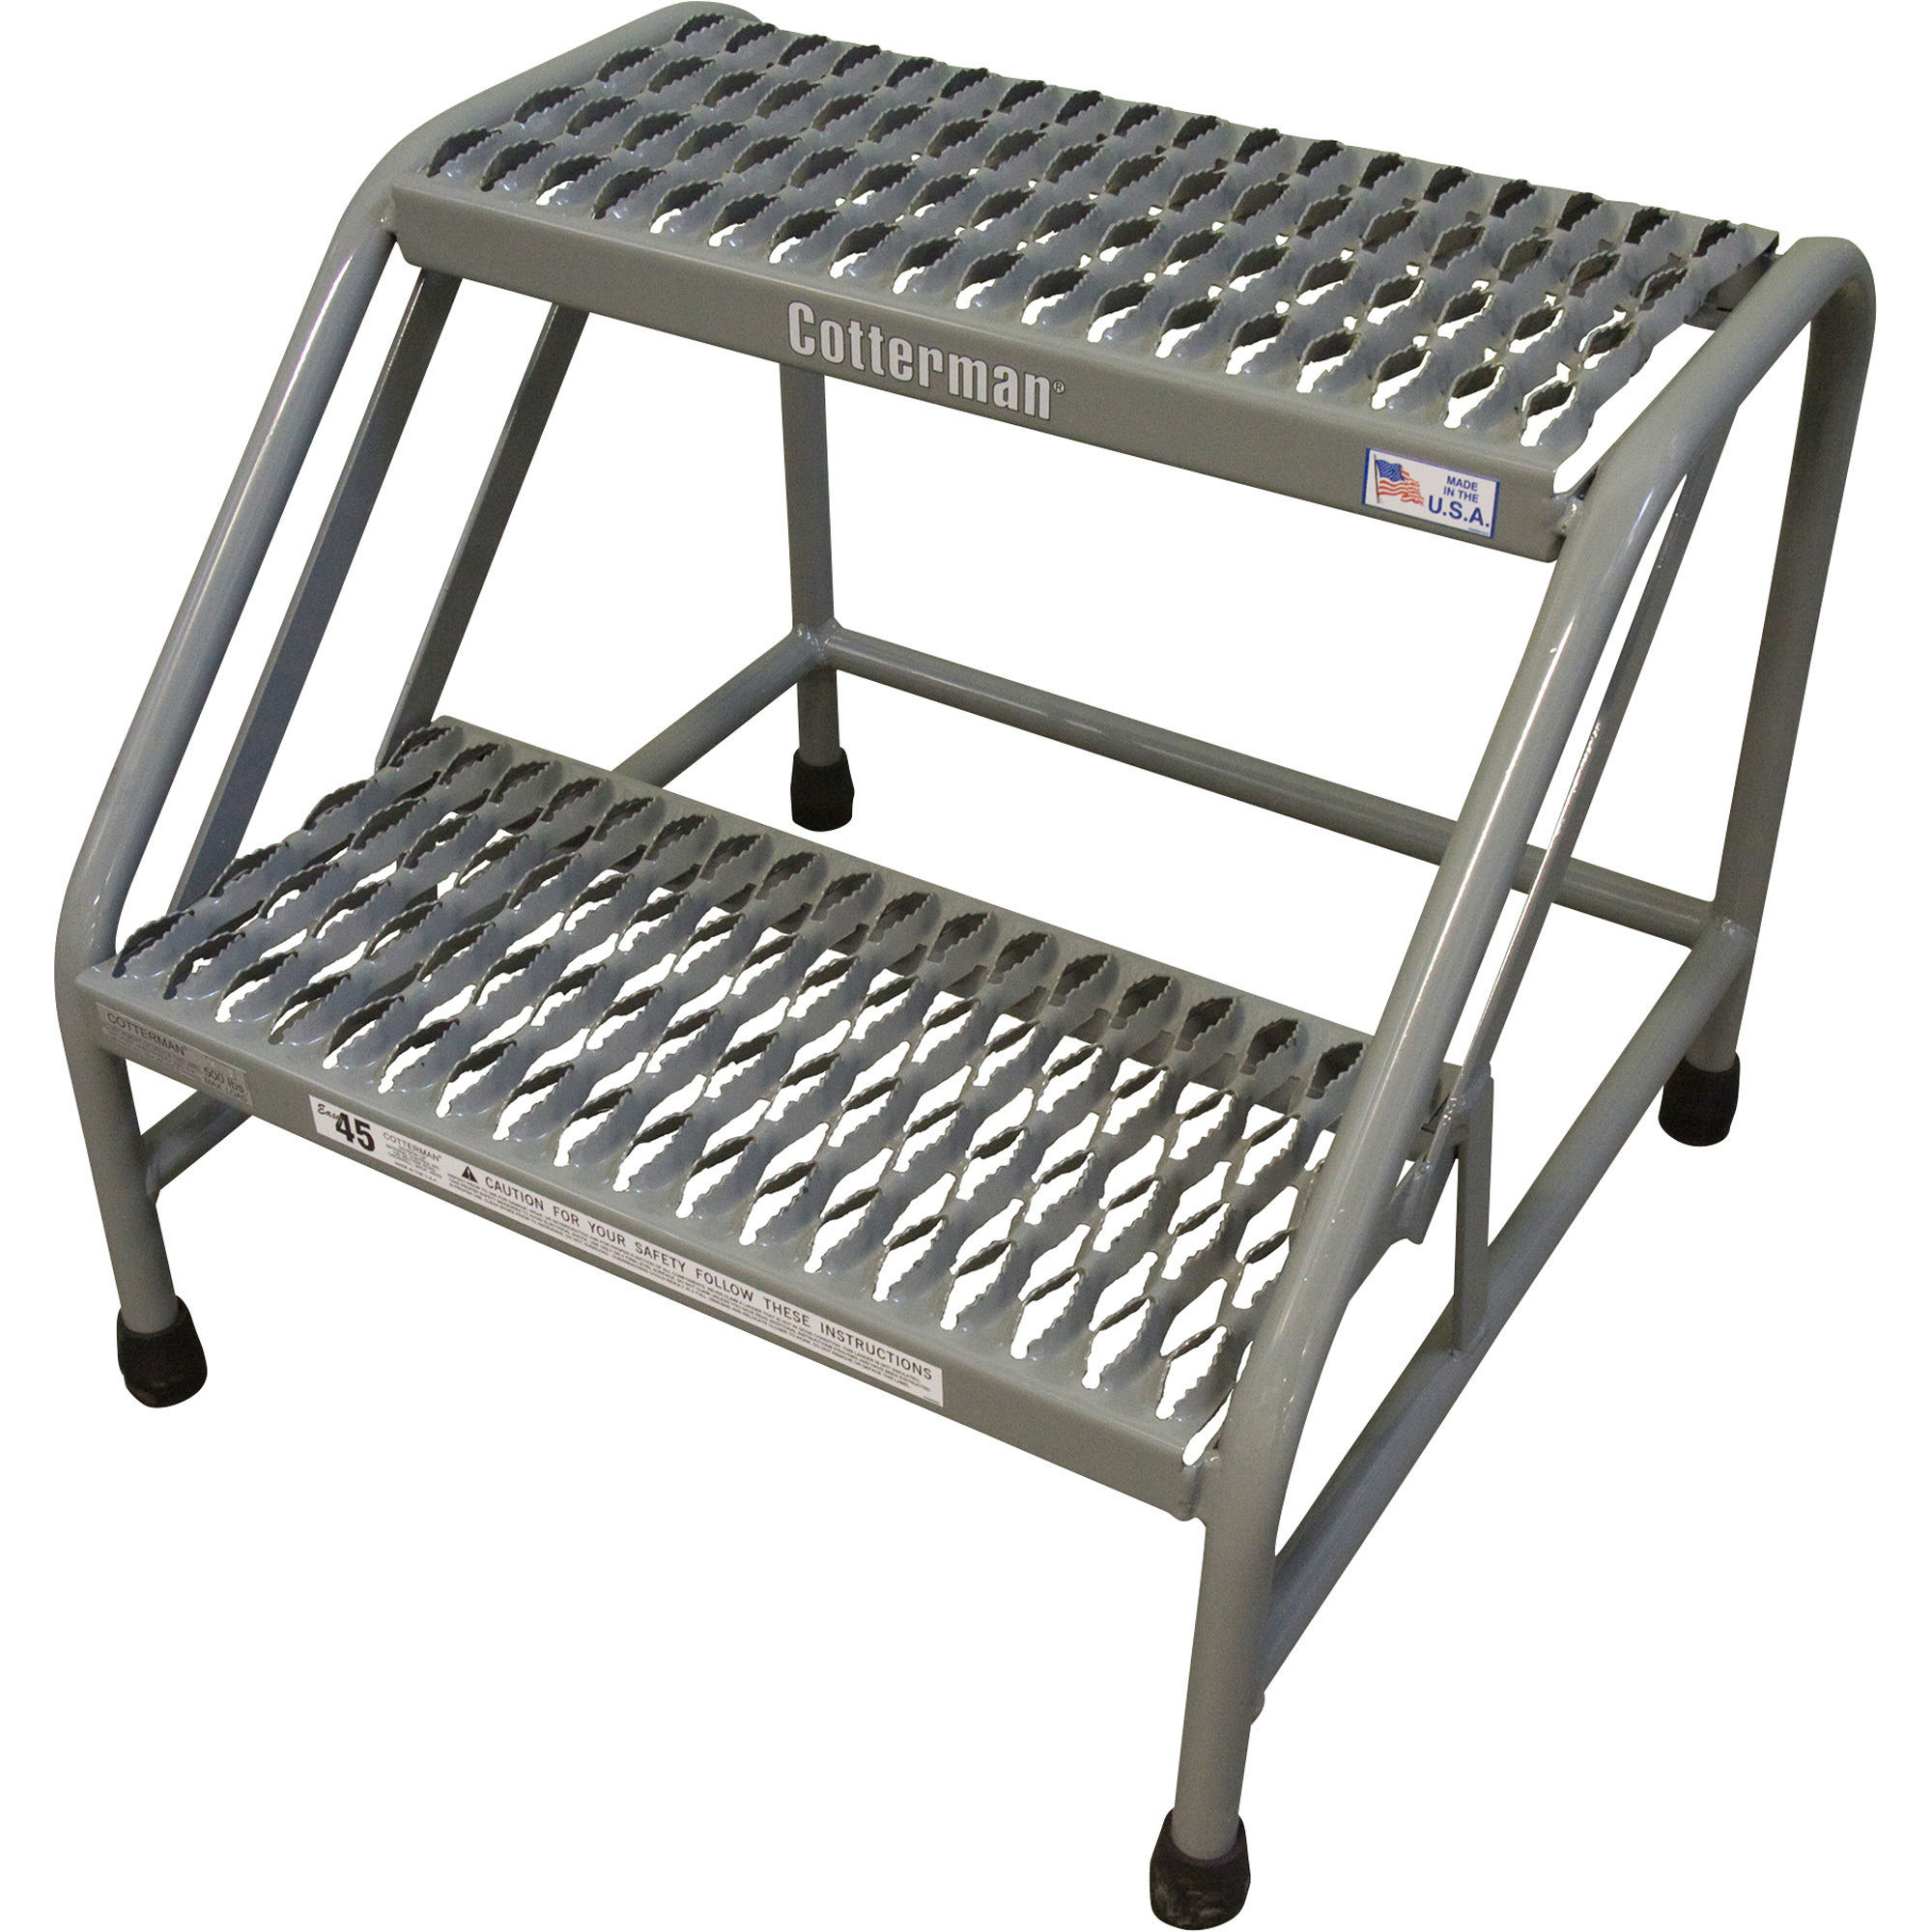 Cotterman Steel Step Stand, 2 Steps, 500-Lb. Capacity, 20in.H